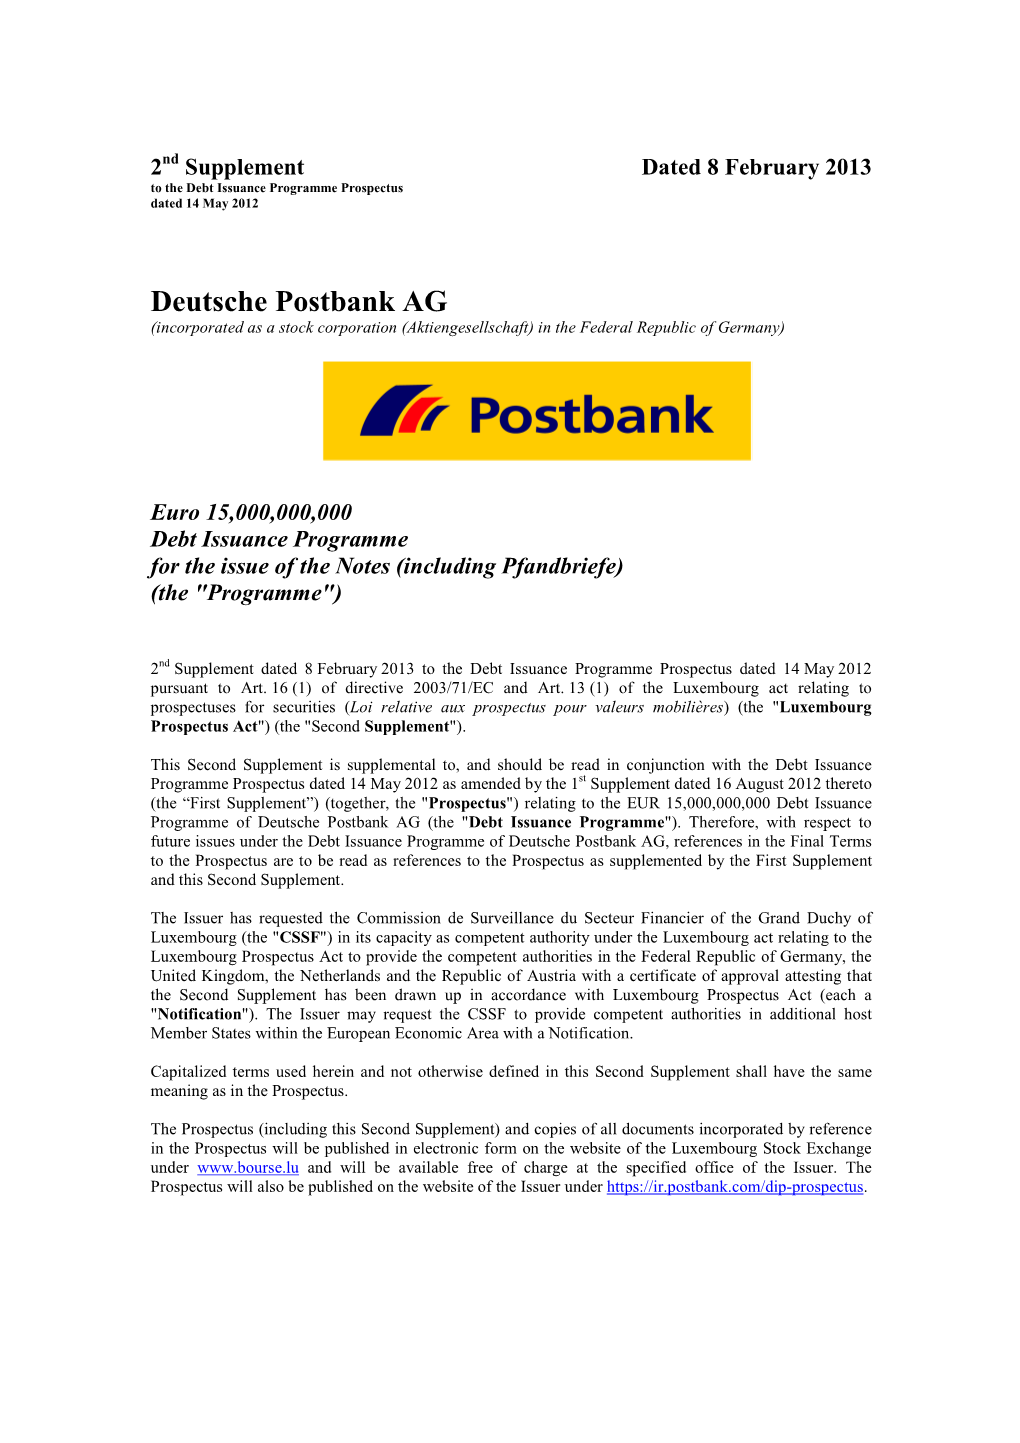 Deutsche Postbank AG (Incorporated As a Stock Corporation (Aktiengesellschaft) in the Federal Republic of Germany)